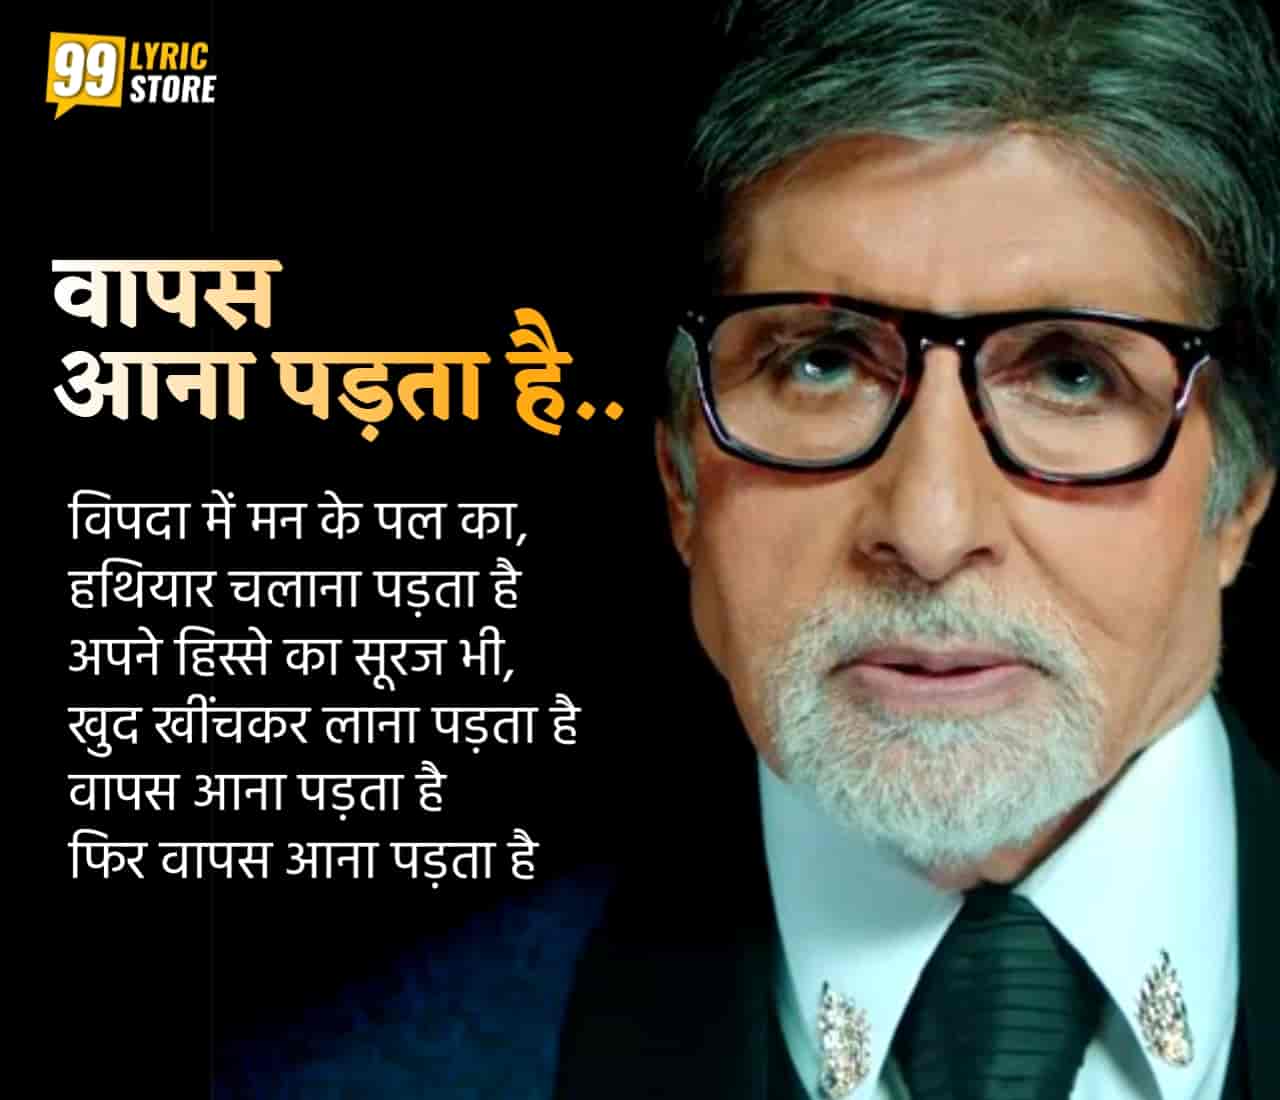 Amitabh Bachchan, who has recently returned to recover from covid-19, has shared a very inspiring and motivating poem on his social media.